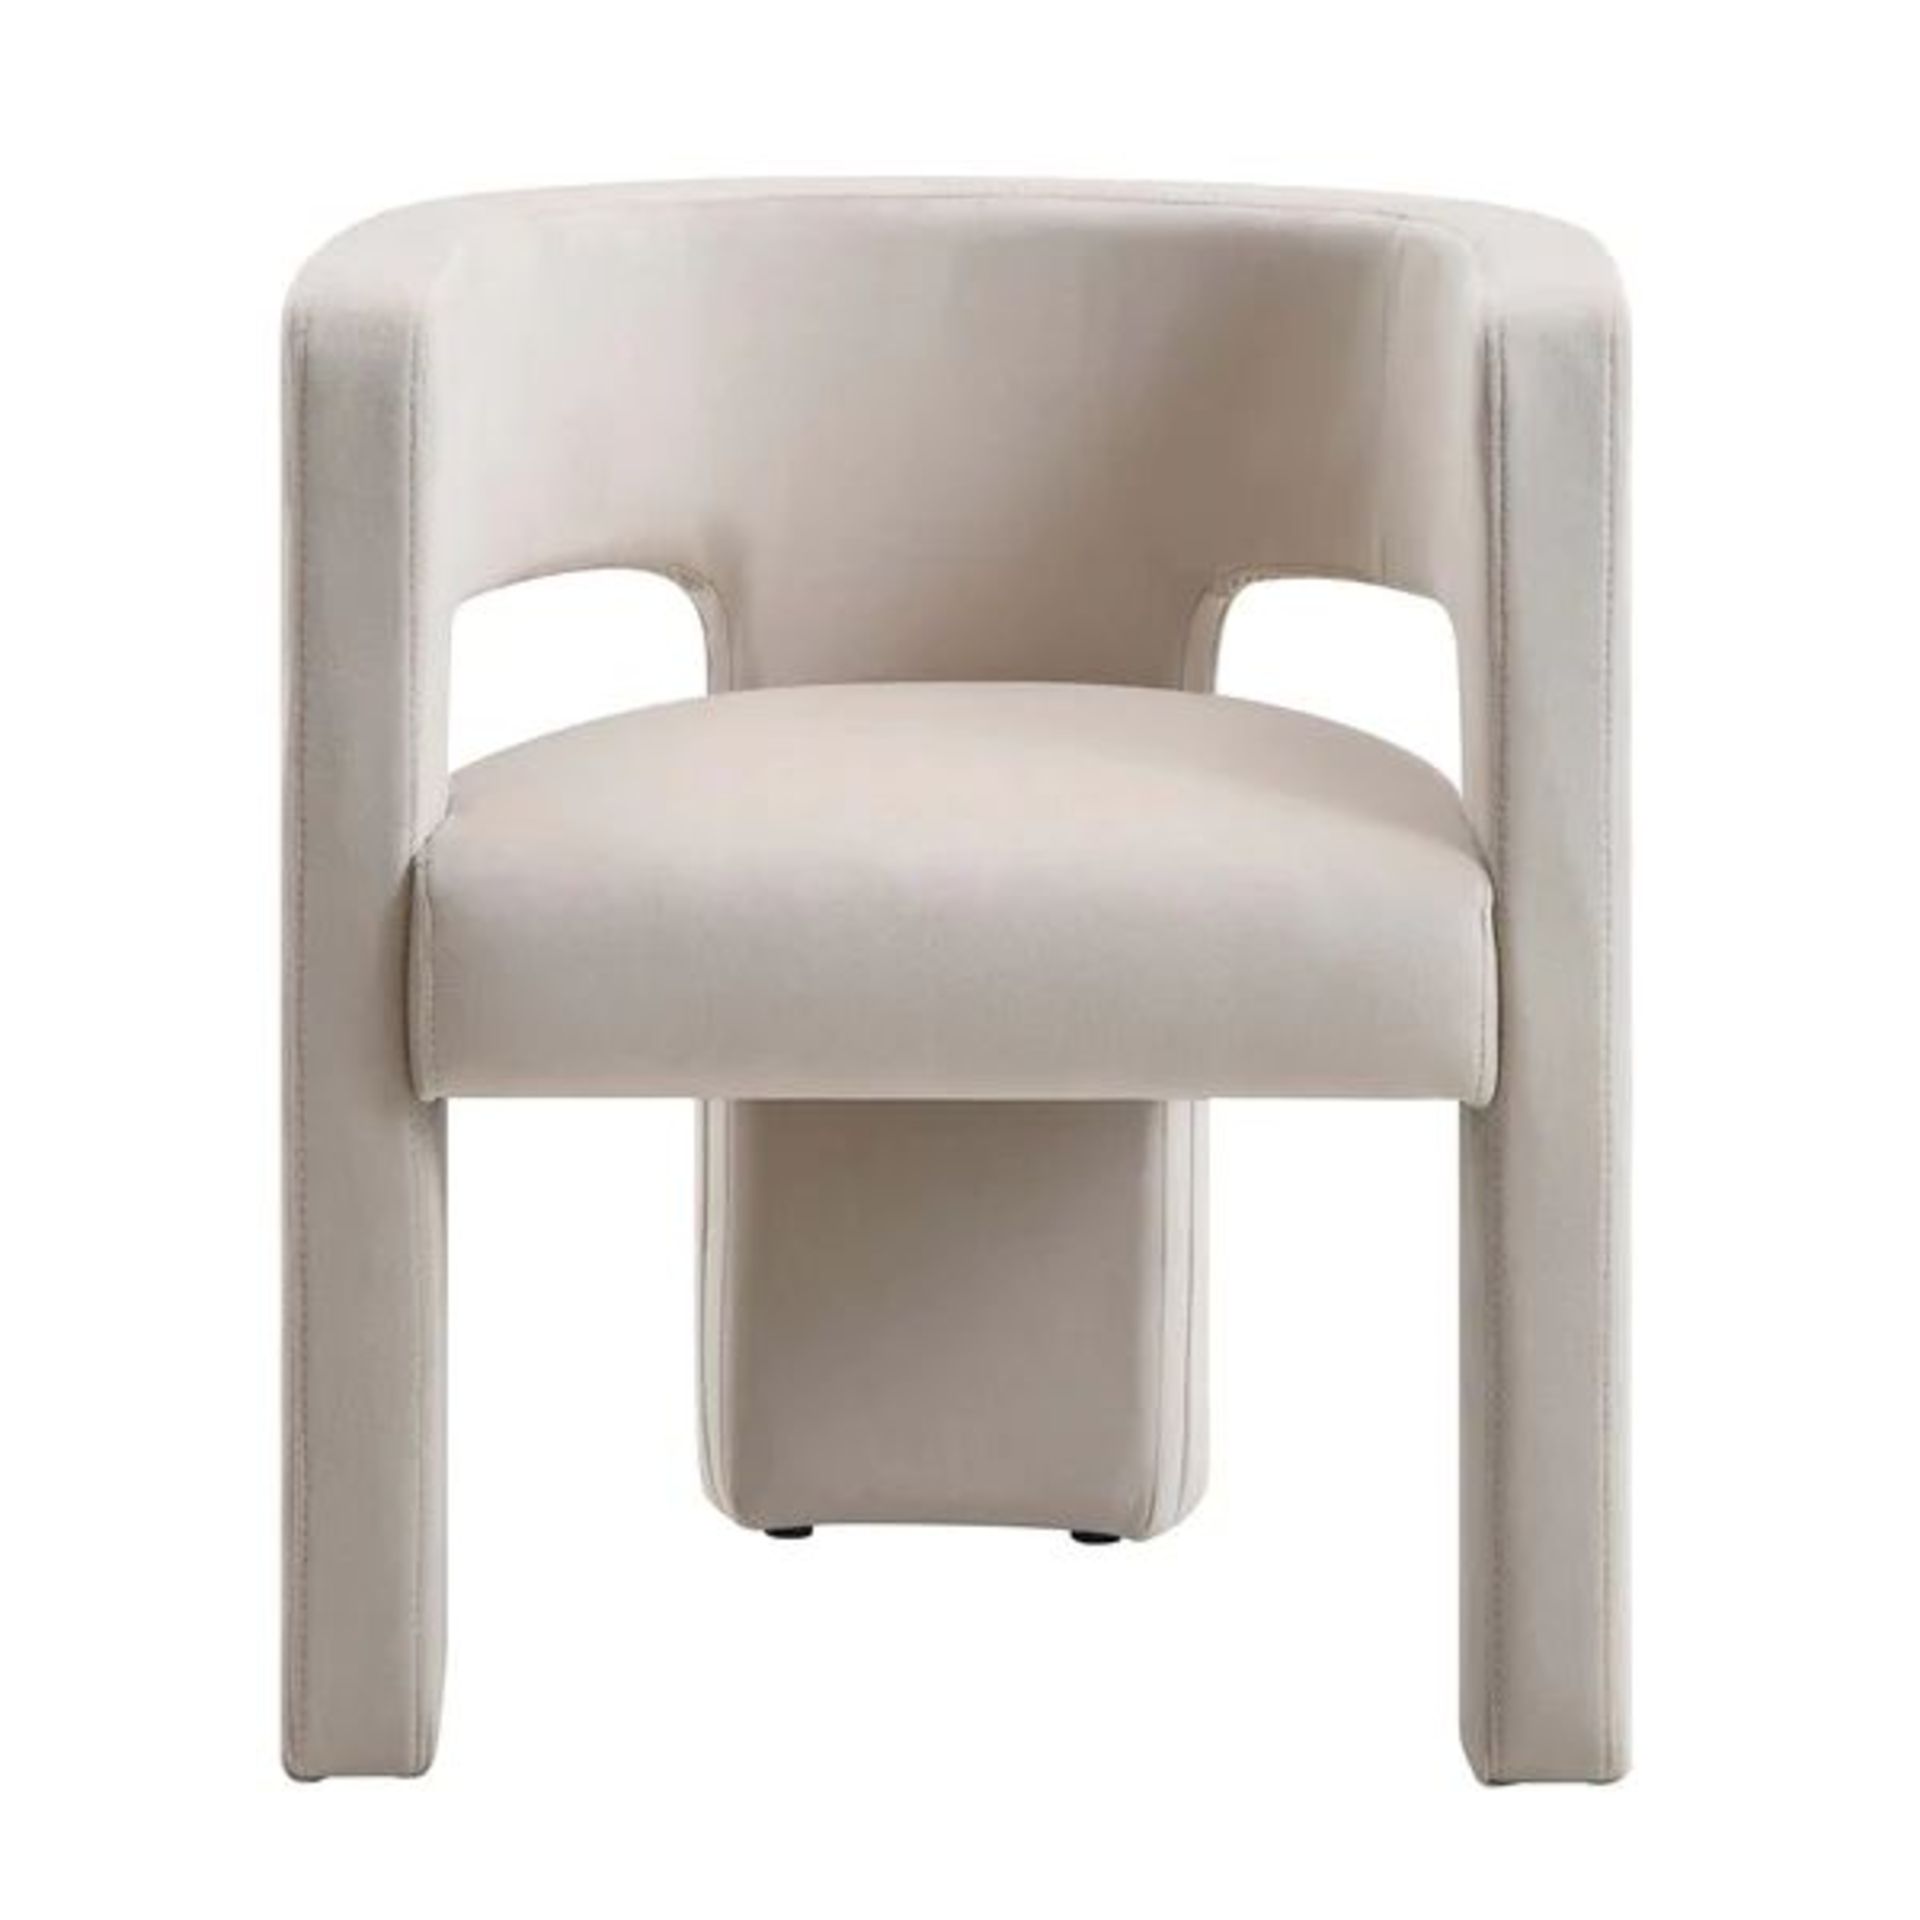 Greenwich Champagne Velvet Dining Chair. - SR24. RRP £199.99. Our beautiful Greenwich chair features